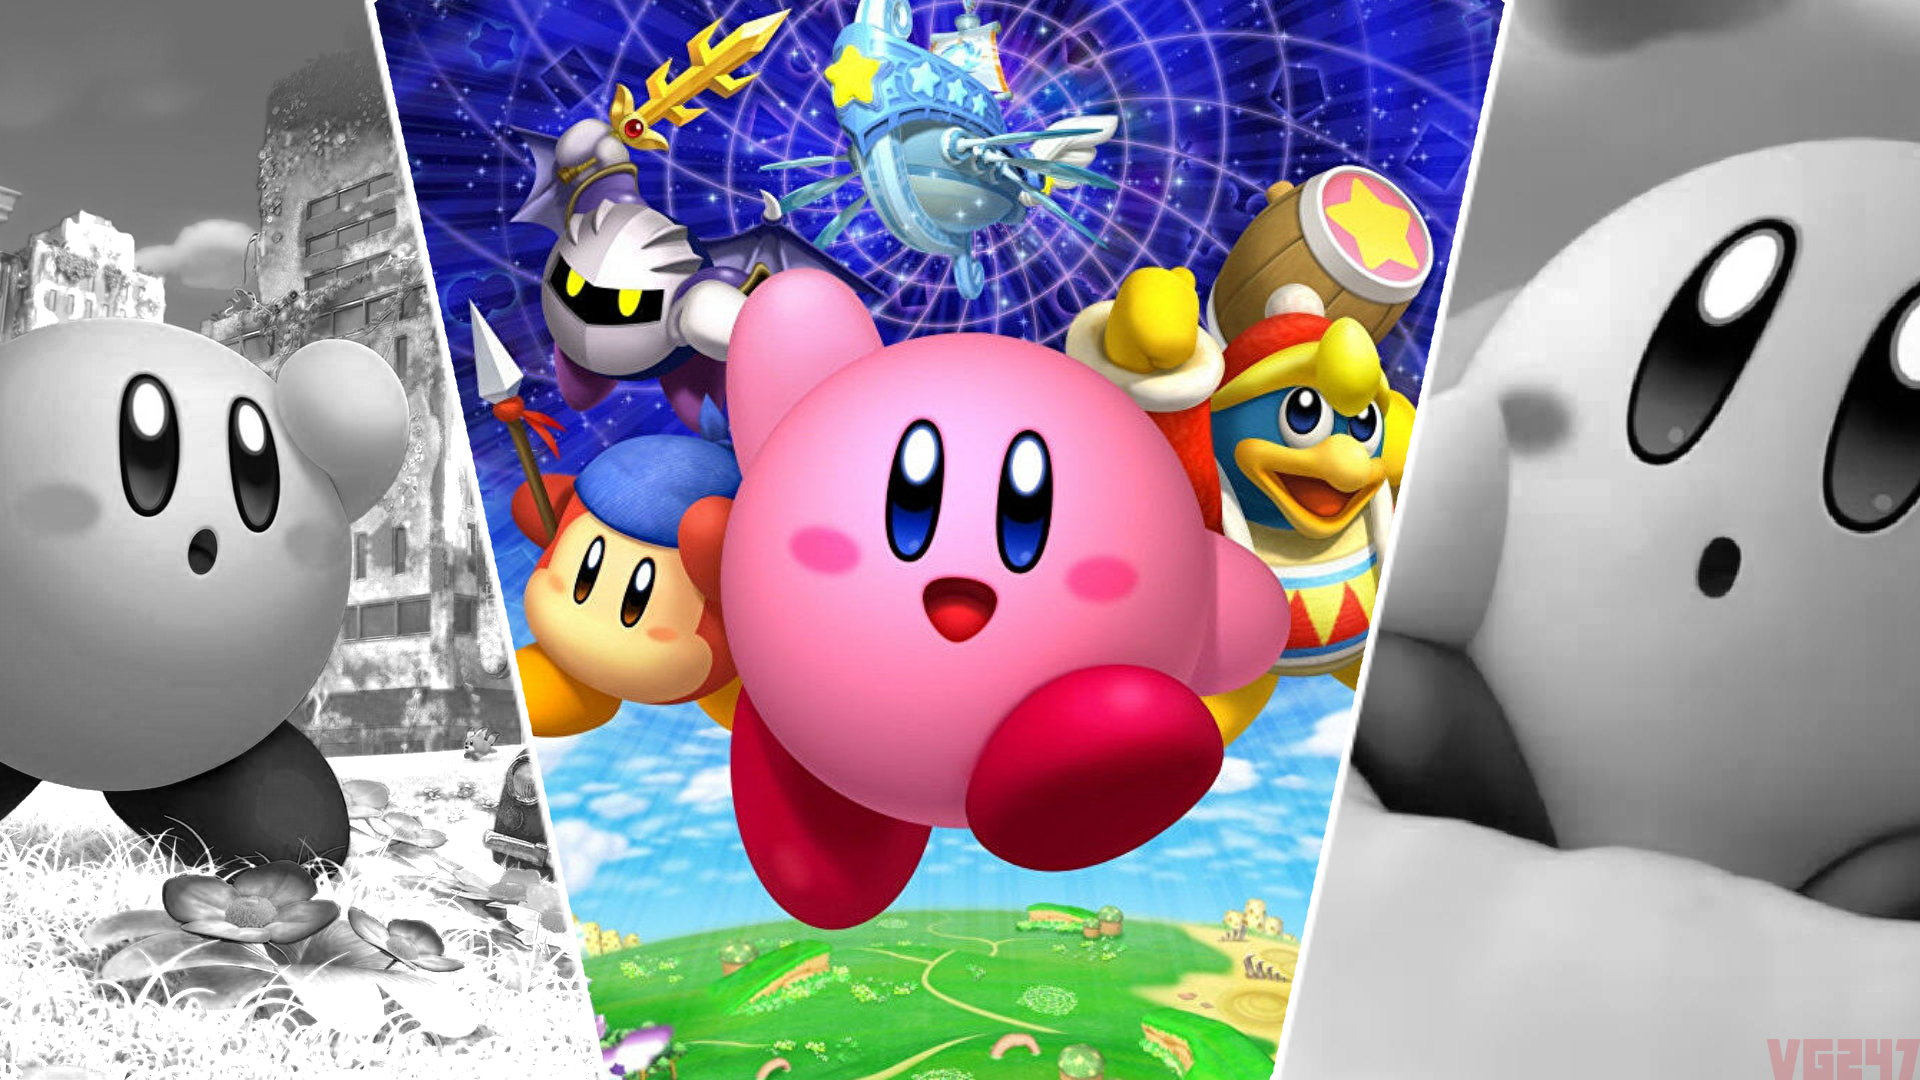 kirby return to dream land deluxe release date